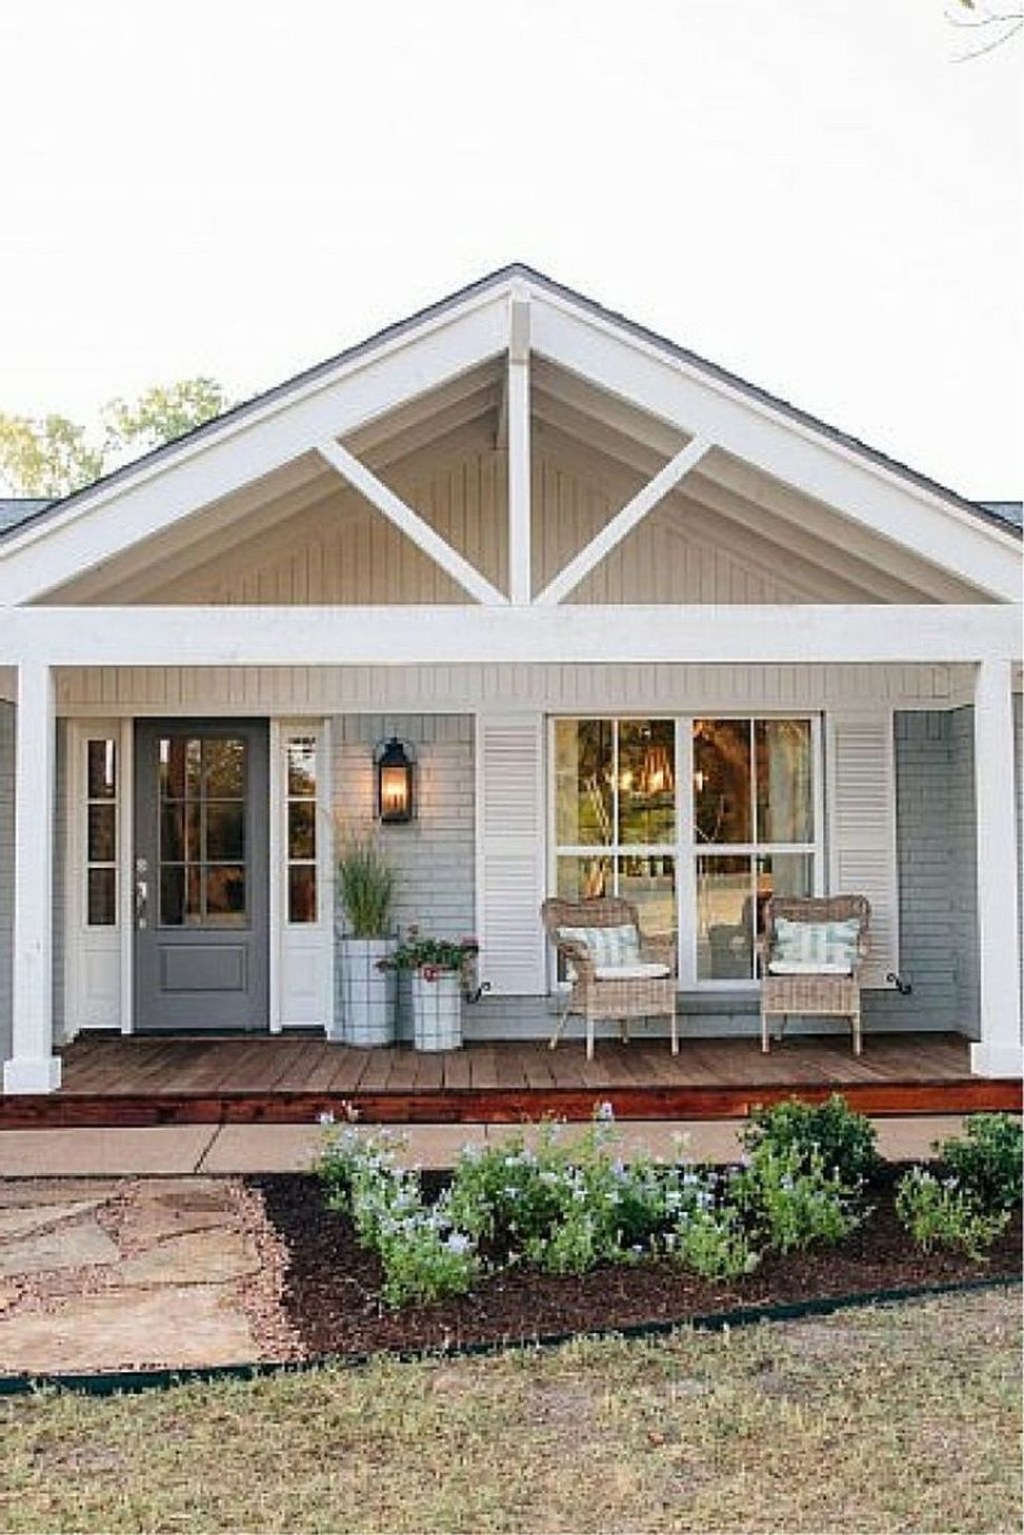 Picture of: Gable Roof-Ranch House Style ideas  ranch house, house